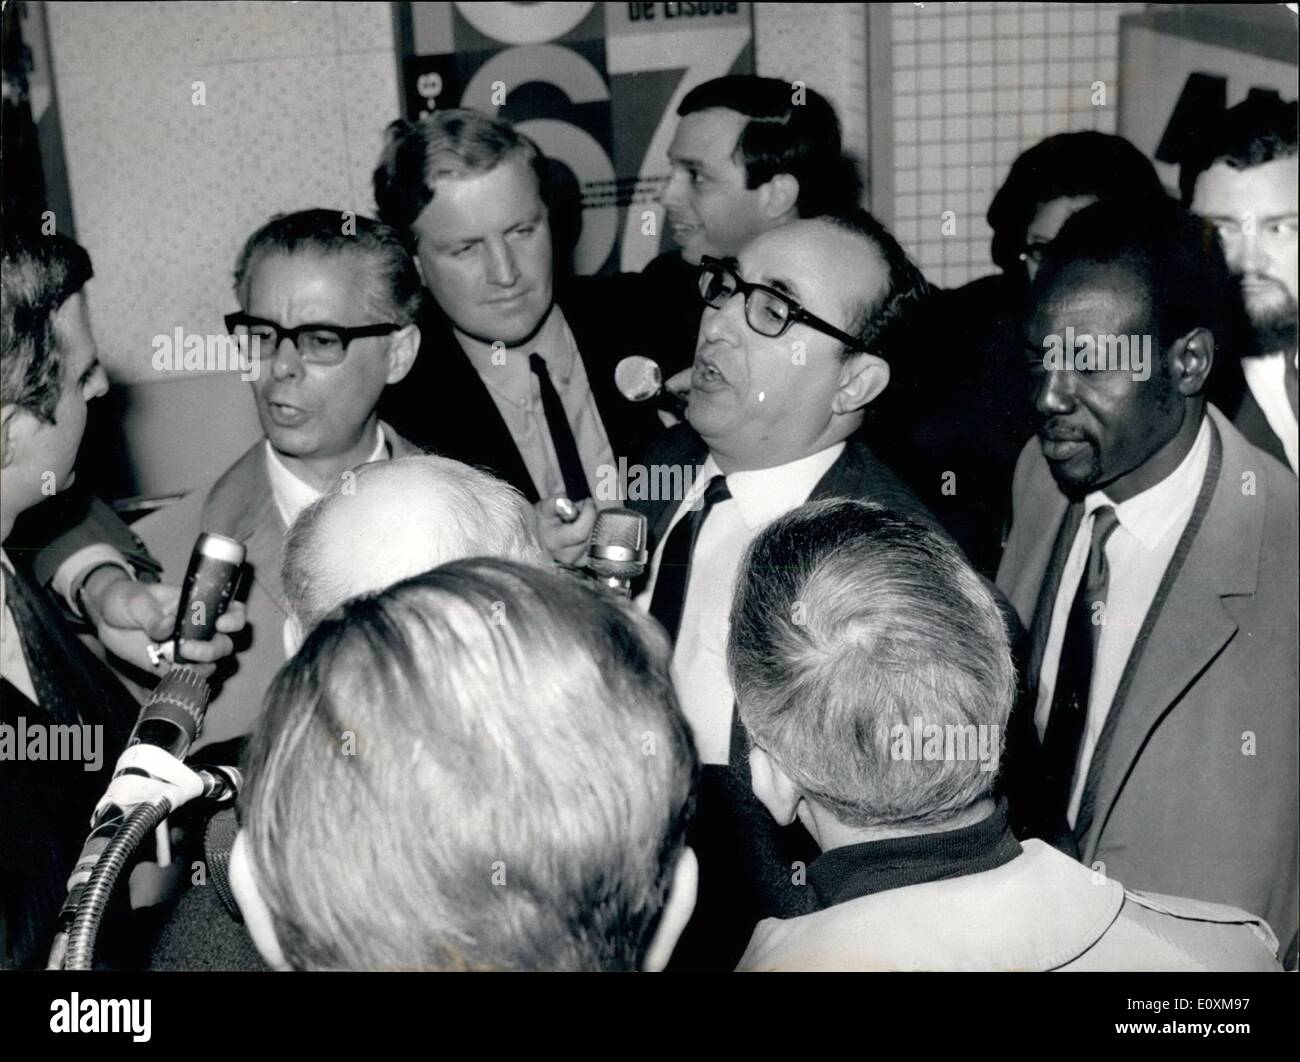 Apr. 04, 1967 - The Uno commission for Aden arrived at Geneva The Uno Commission which left Aden because of alleged non-cooperation from the British has arrived at Geneva, where they will make up their report. Photo shows The Uno Aden-commission arriving at Geneva airport, where journalists were eager to question them. From left to right (both with spectacles) Dr. Manuel Guerrero (Venezuela, head of the commission), Abdul Shalizi (Afghanistan) and Mussa Keita (Rep. of Mali) Stock Photo